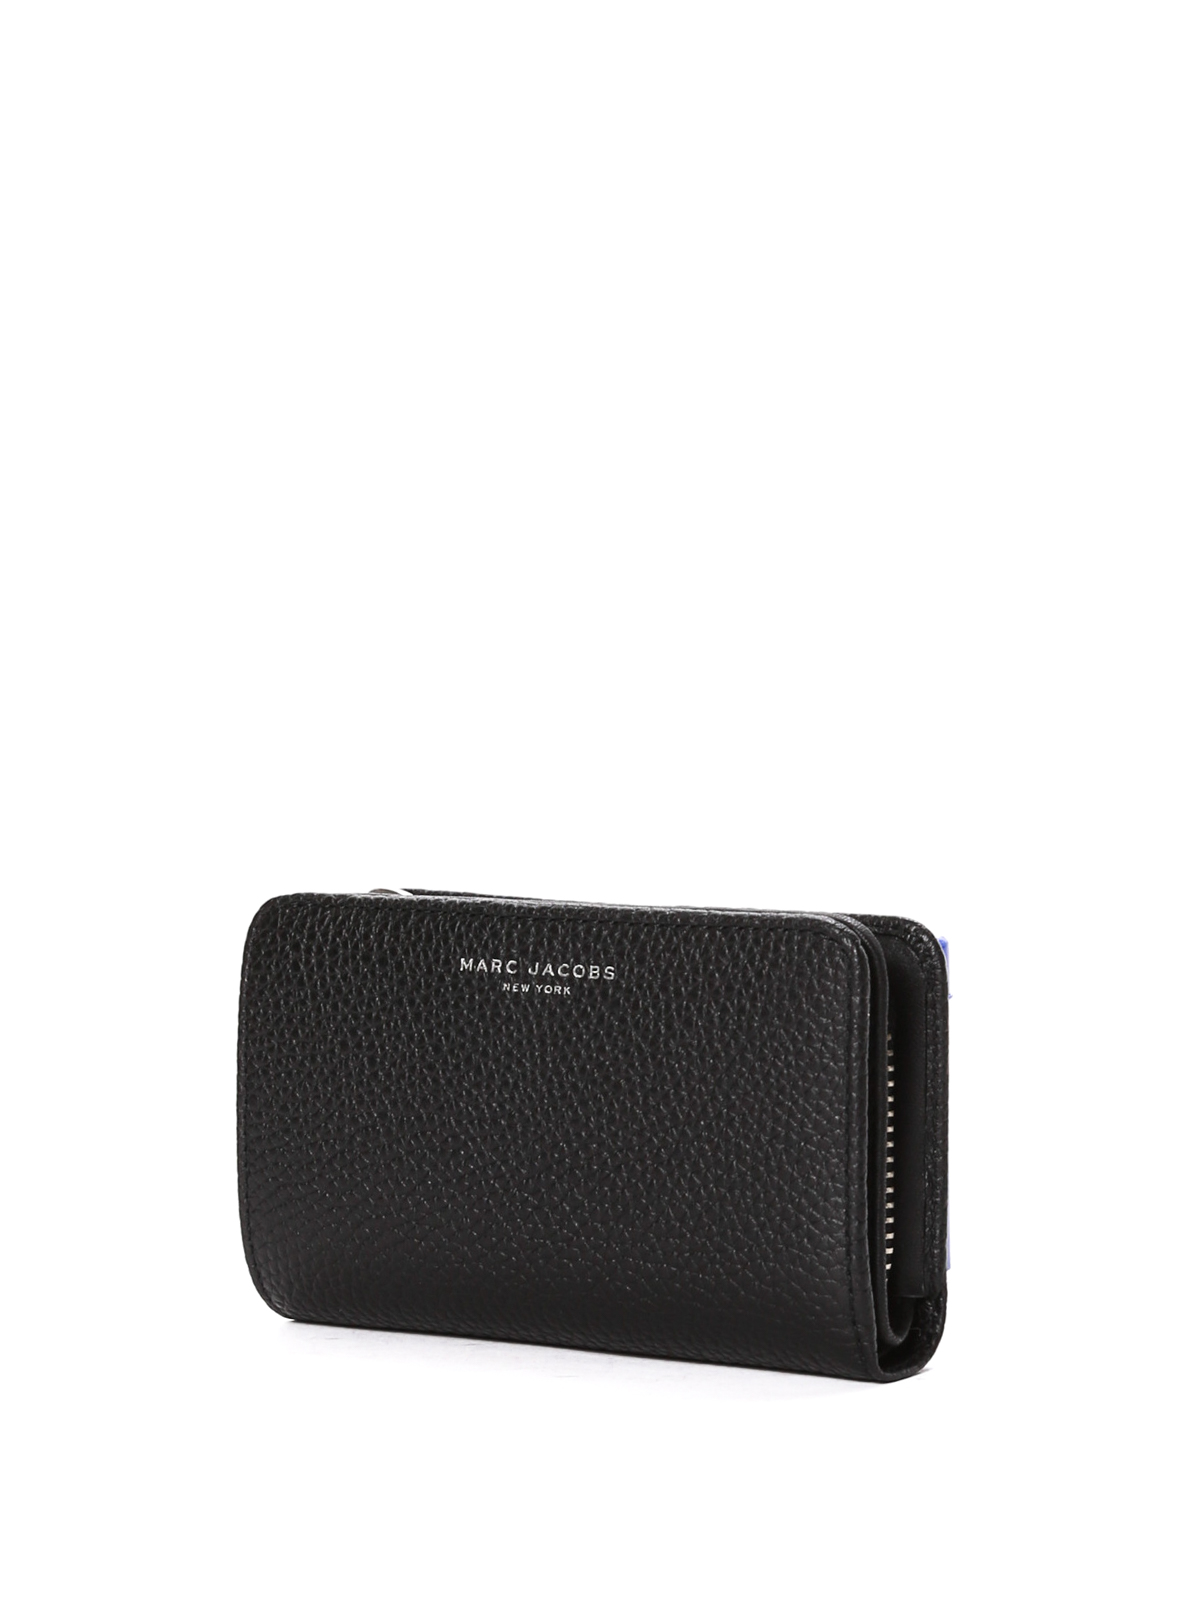 MARC JACOBS Compact Leather Wallet